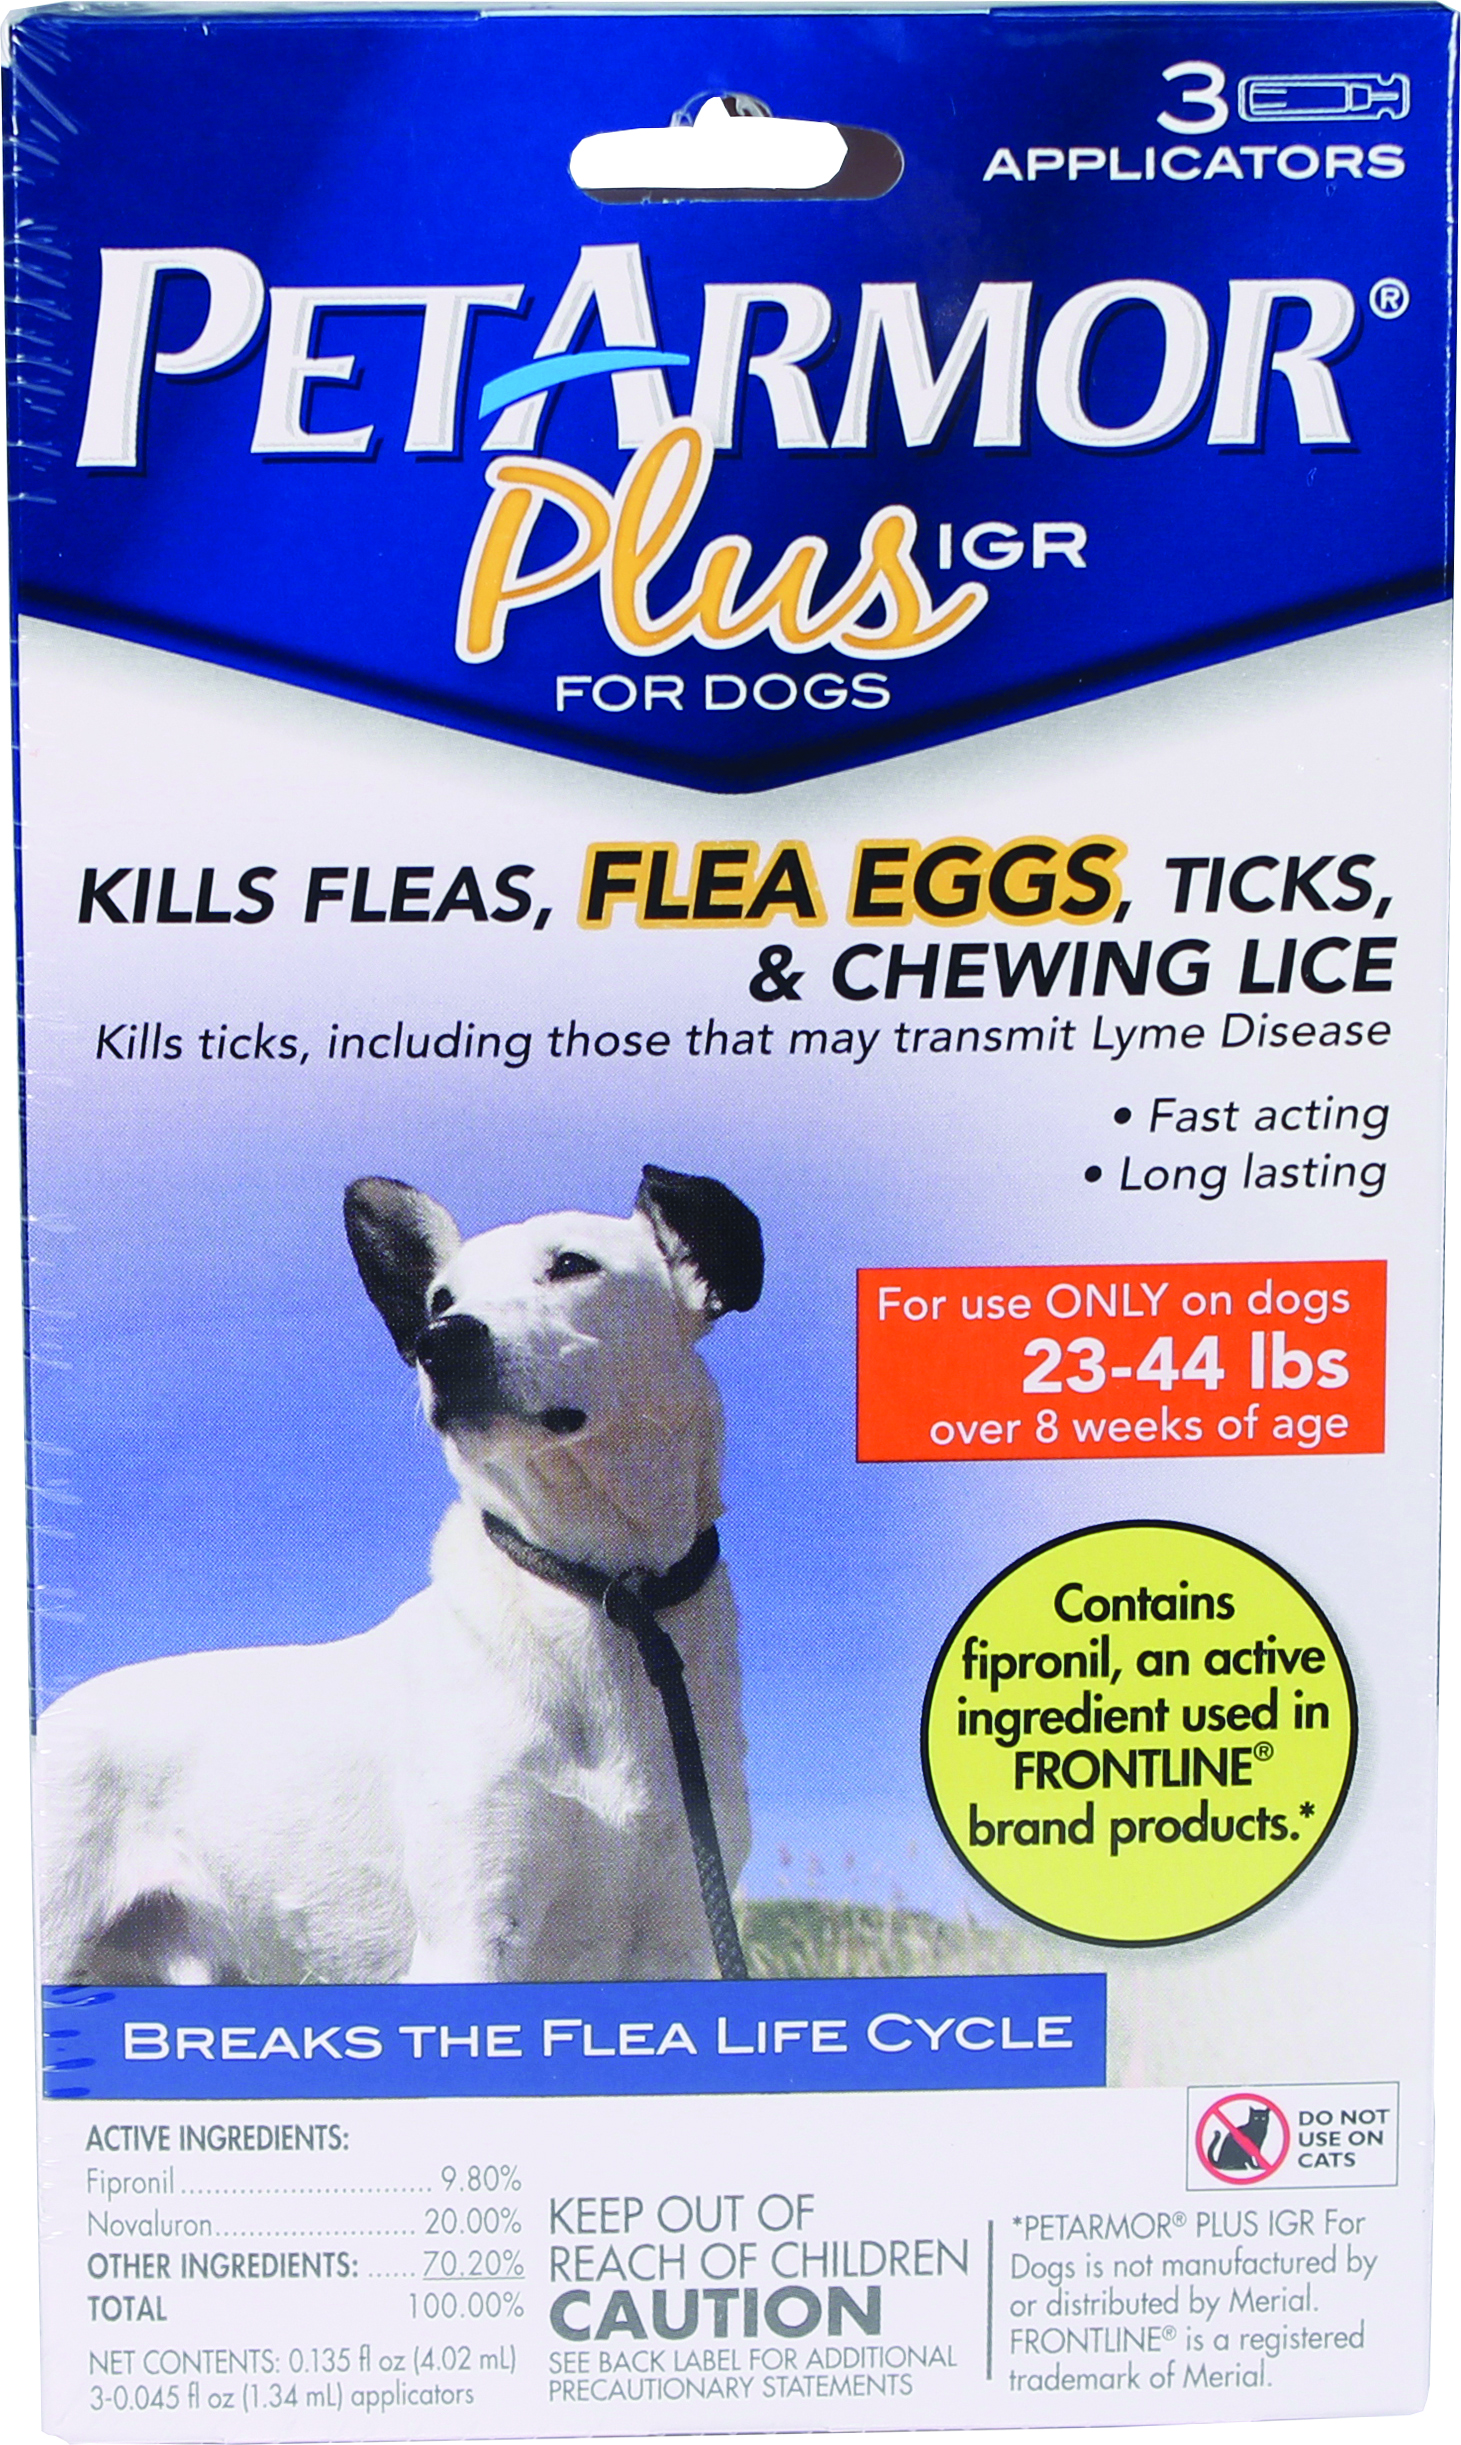 PET ARMOR PLUS IGR FLEA AND TICK TOPICAL FOR DOGS